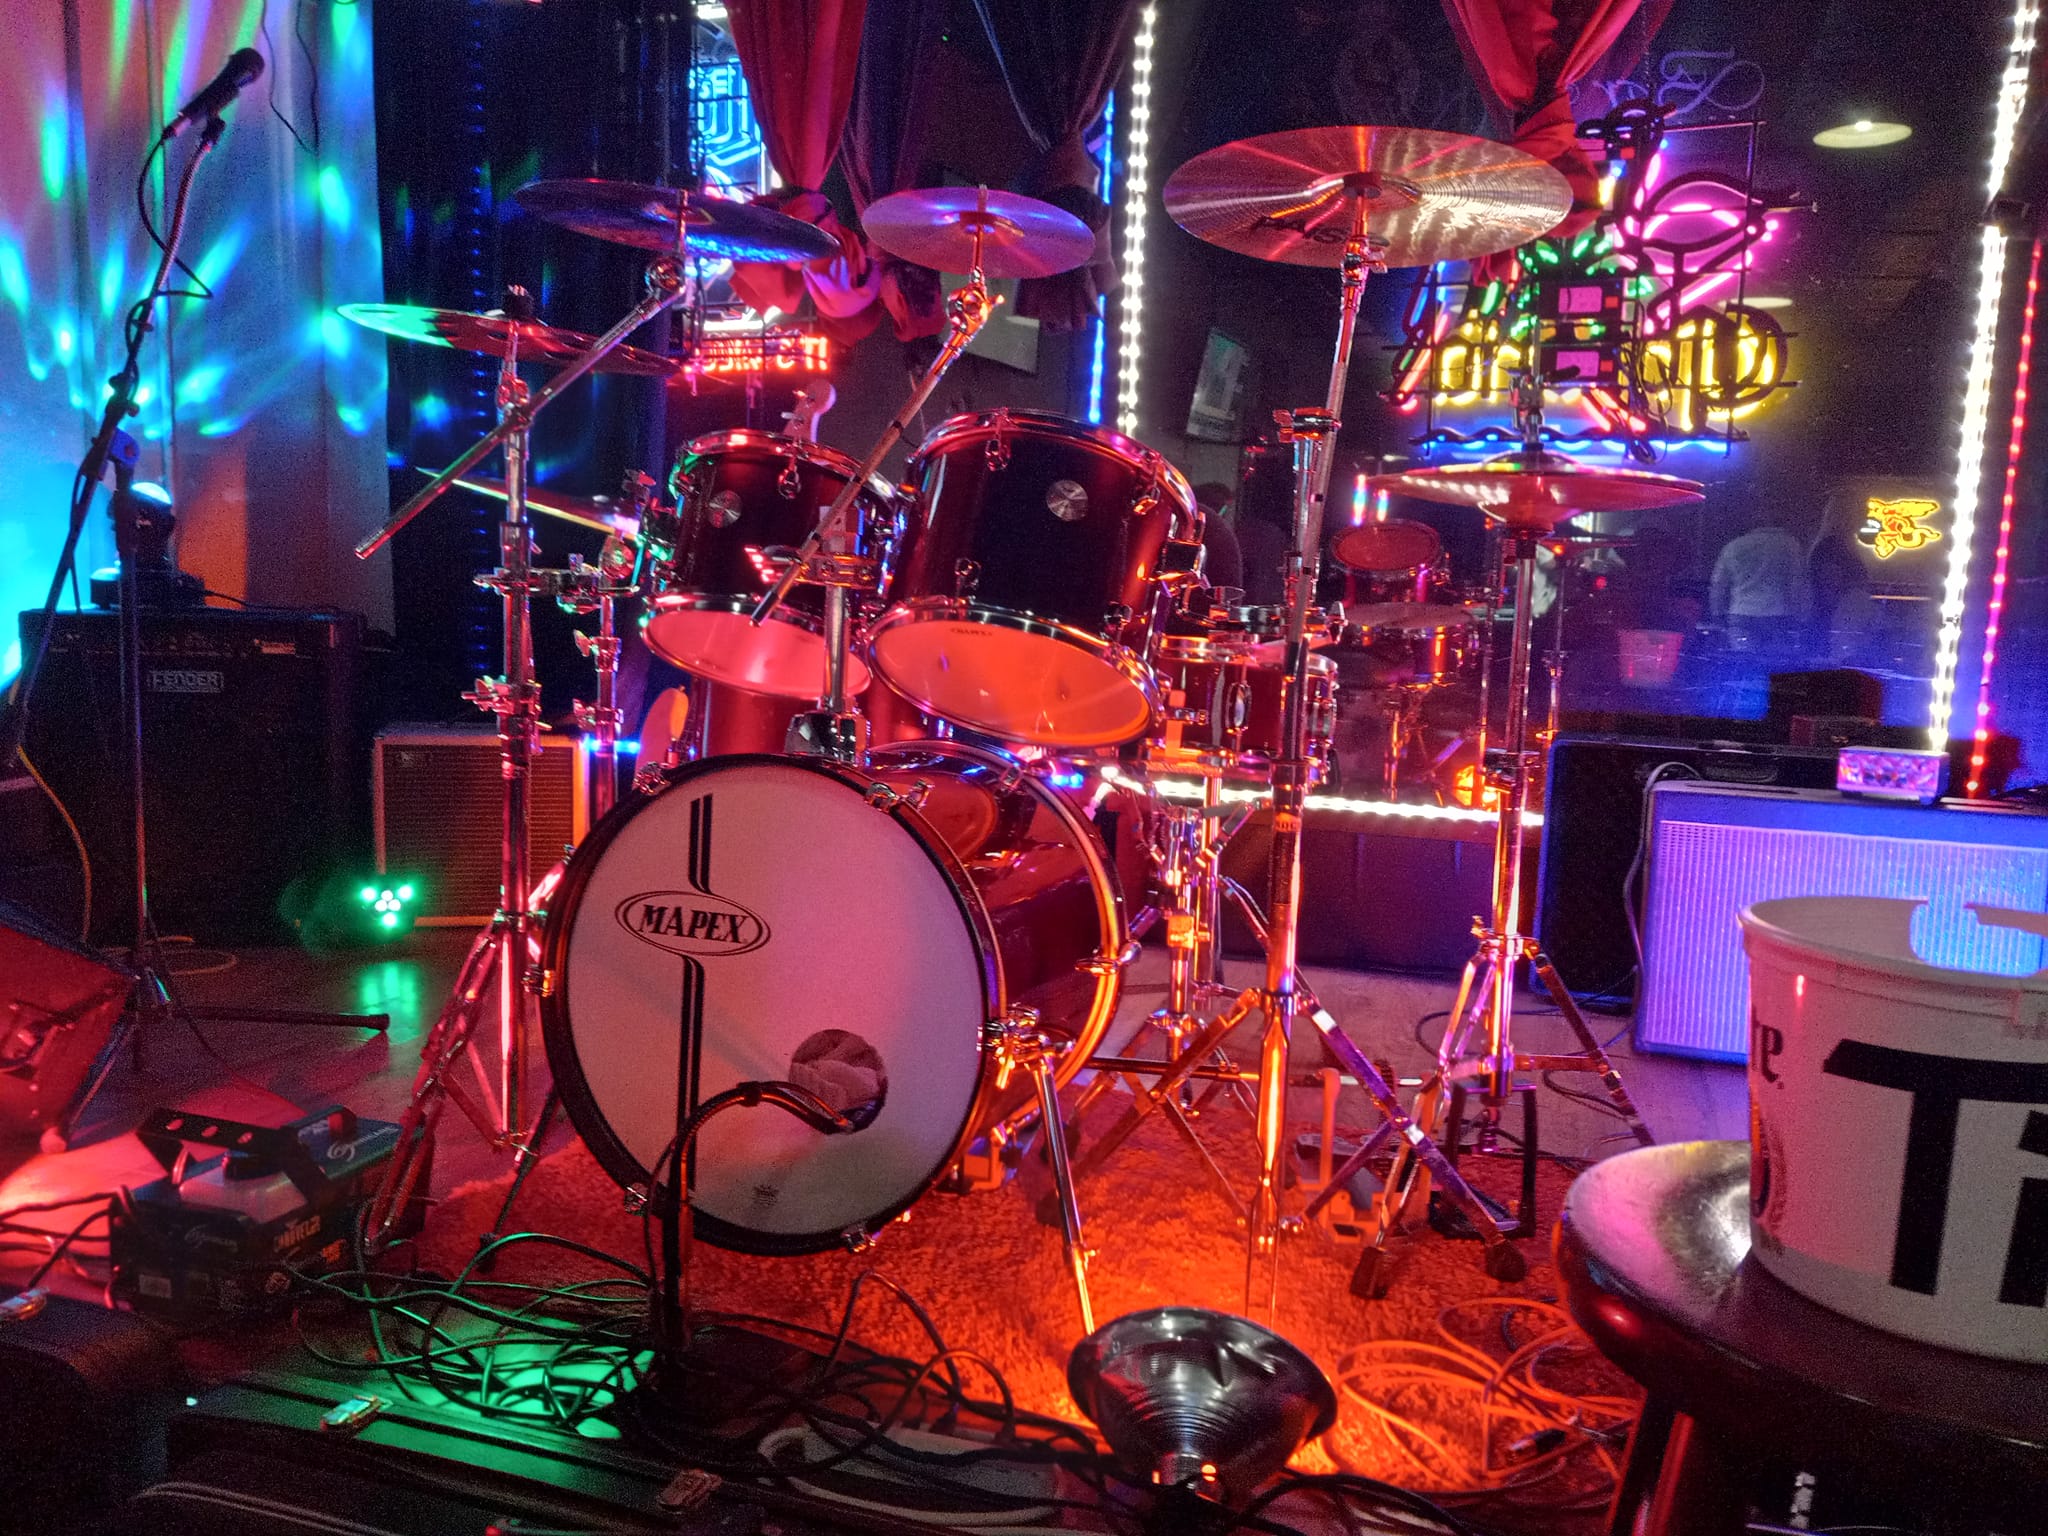 My Mapex Voyager drum kit set up at a local venue